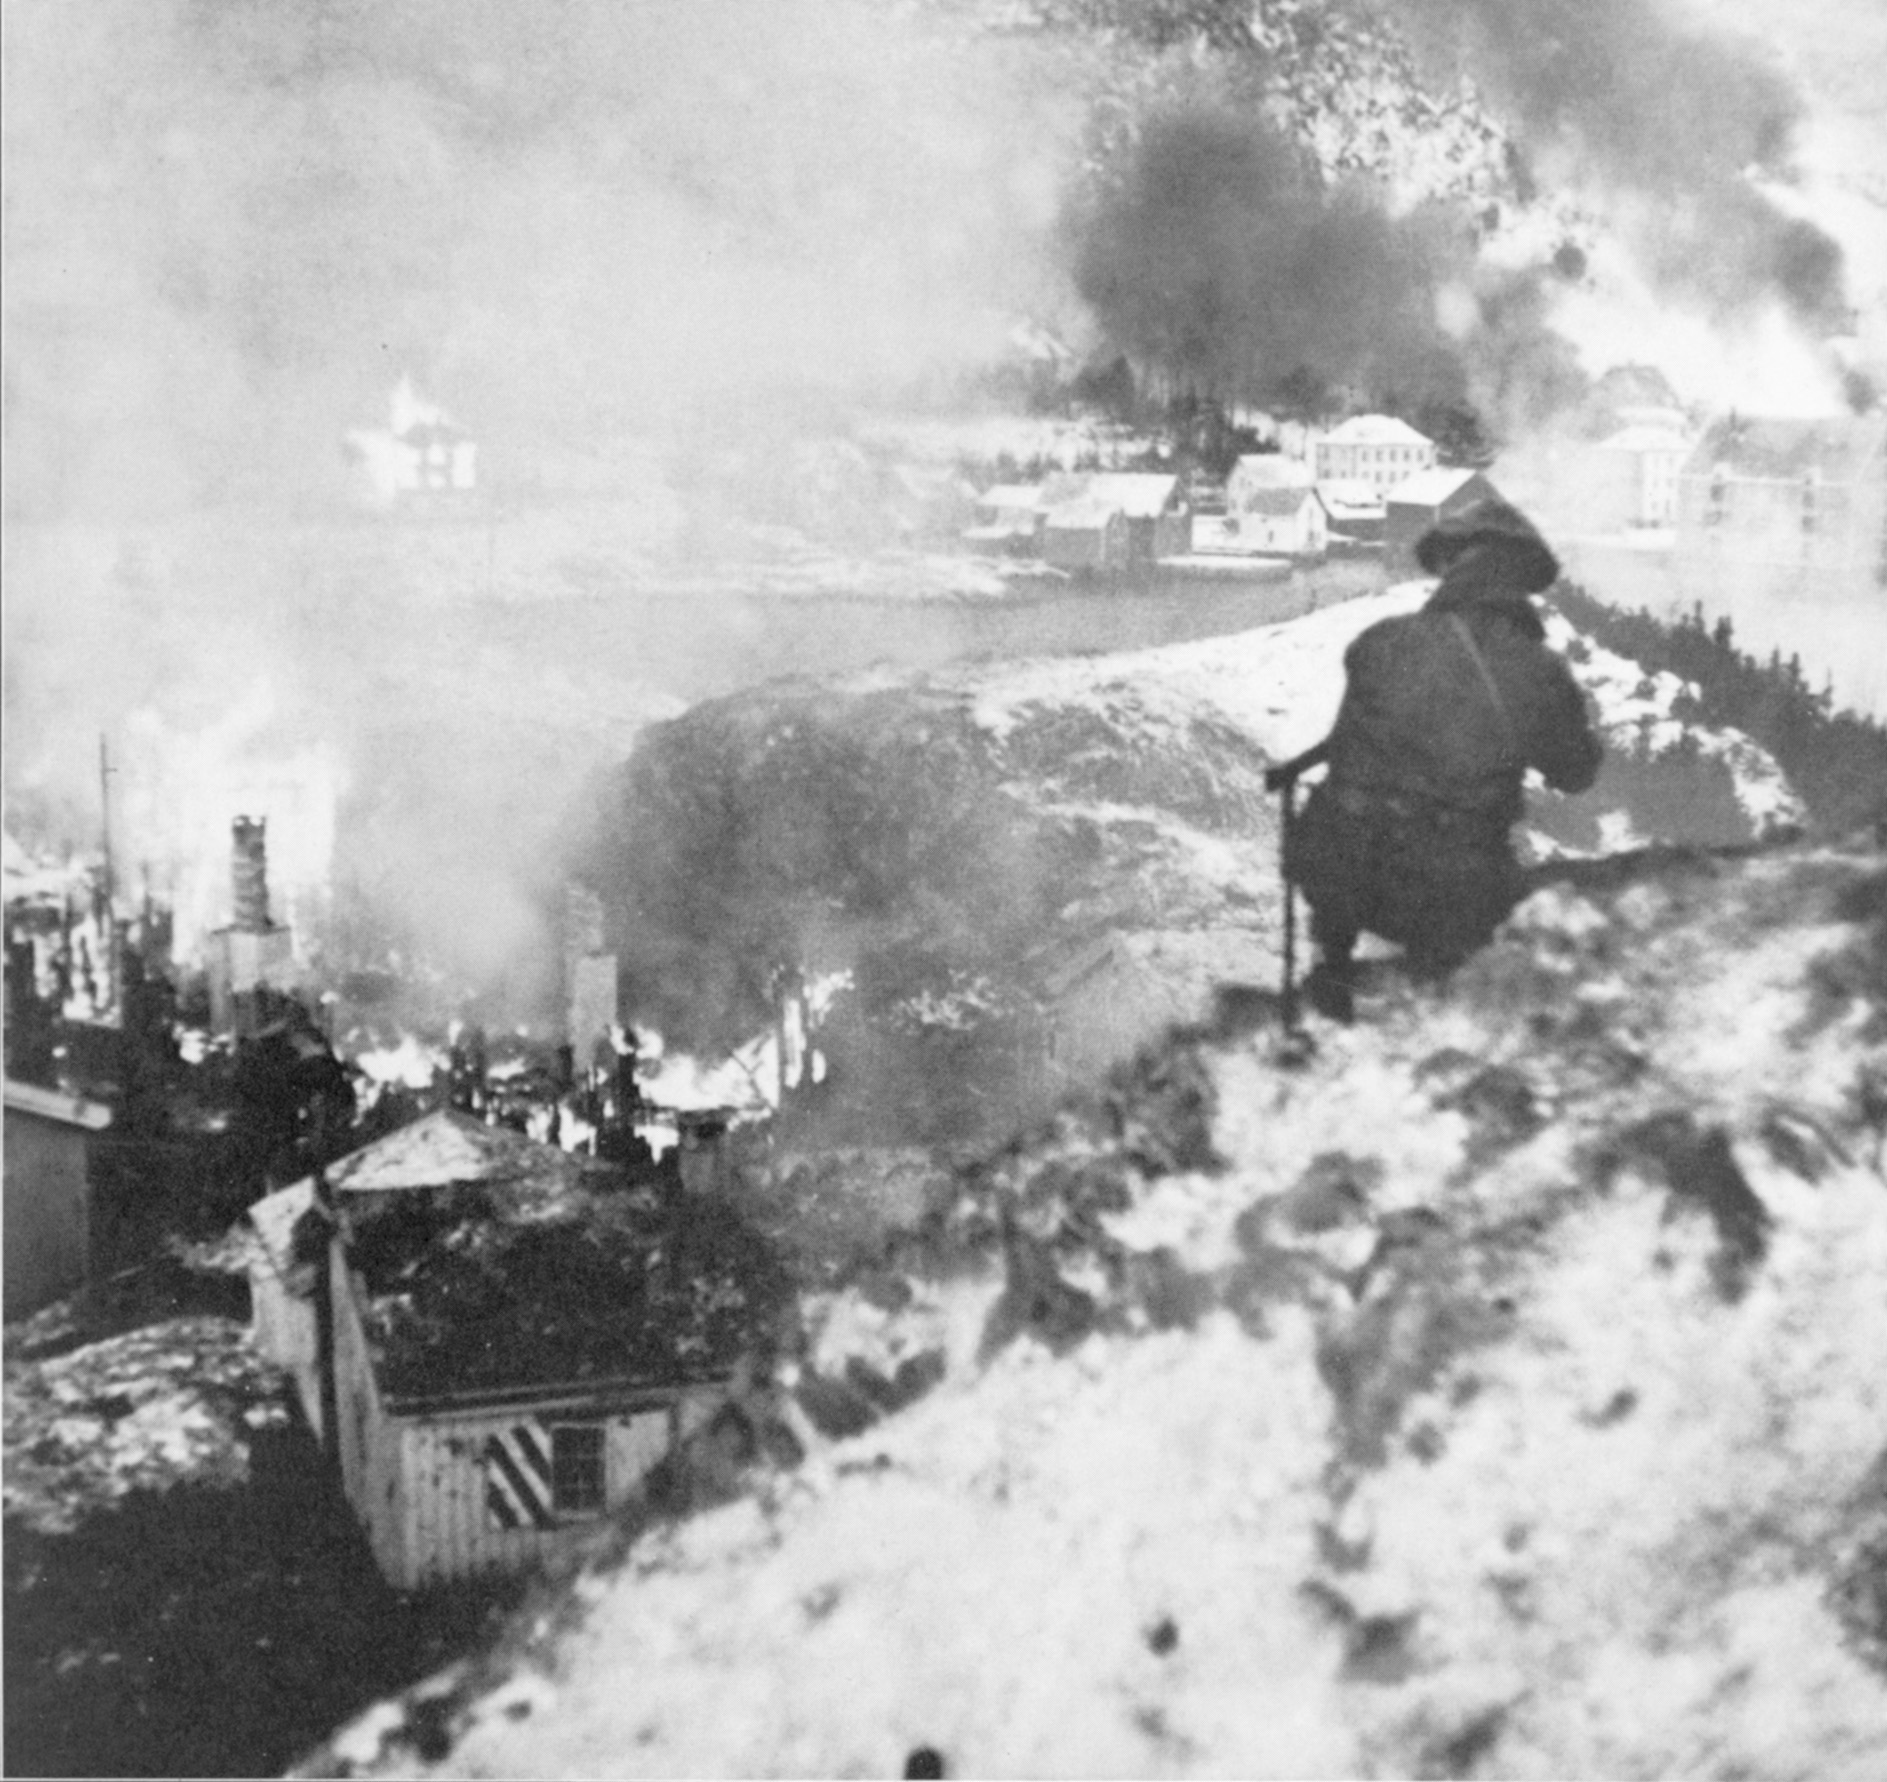 A British Commando on a hill above the demolished German barracks on Maaloy watches the action across the fjord in South Vaagso.